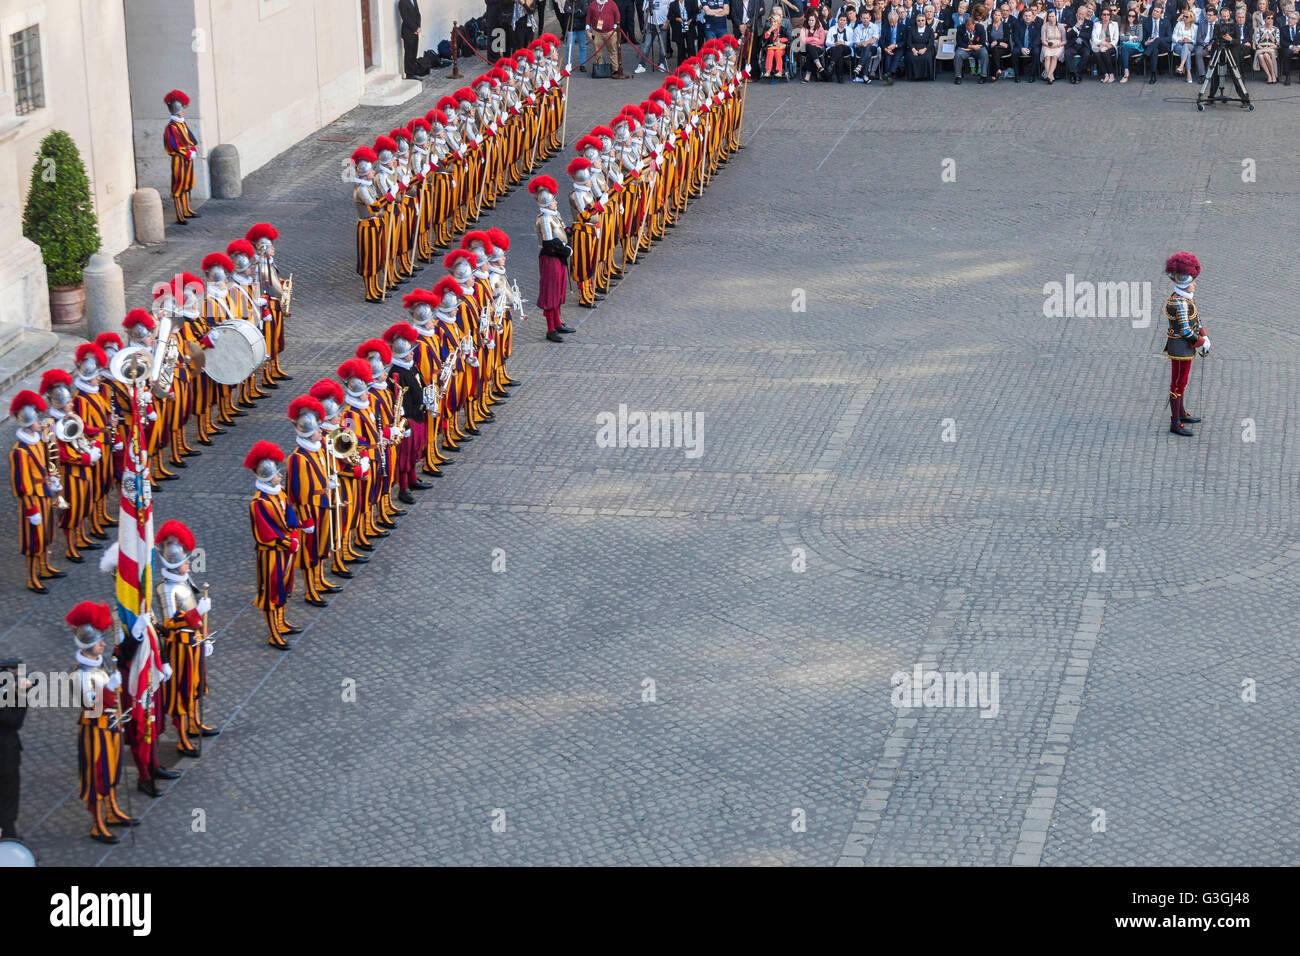 Swiss Guards take part in a swearing-in ceremony   in San Damaso Courtyard. The annual swearing-in ceremony for the new papal Swiss Guards takes place on May 6, commemorating the 147 who died defending Pope Clement VII on the same day in 1527 during the sack of Rome. (Photo by Giuseppe Ciccia / Pacific Press) Stock Photo